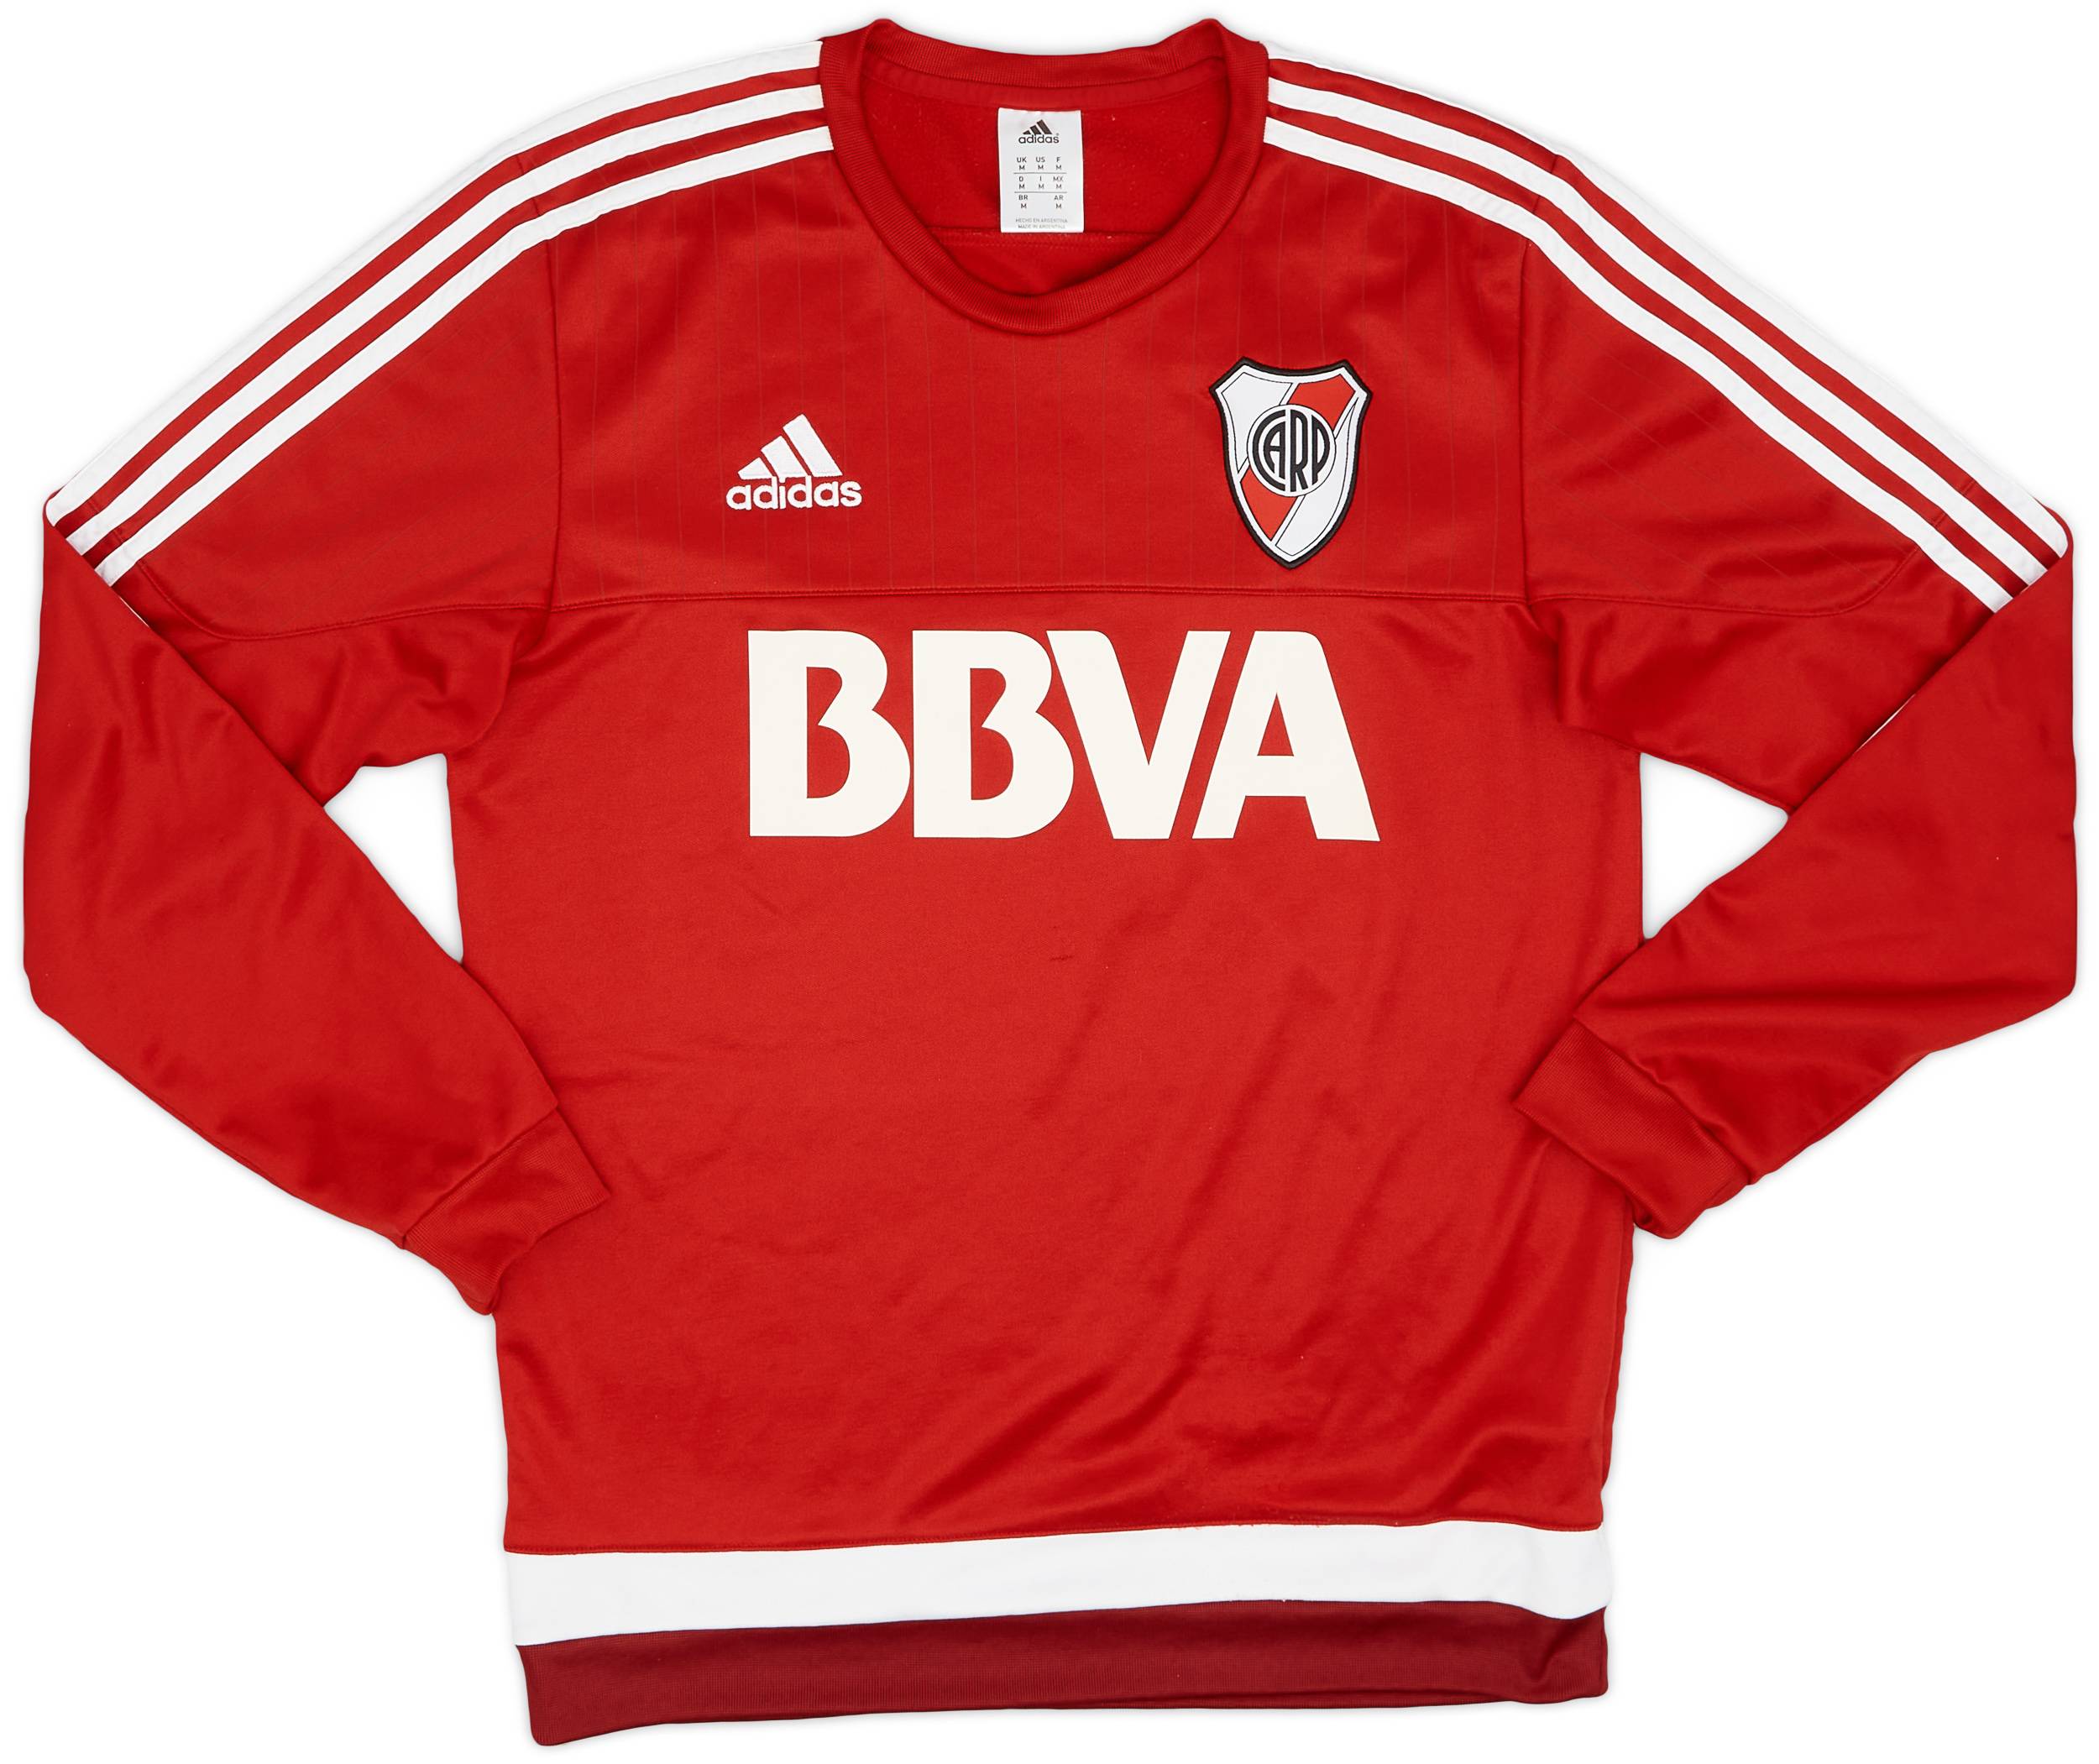 2016-17 River Plate adidas Sweat Top - 8/10 - (M)